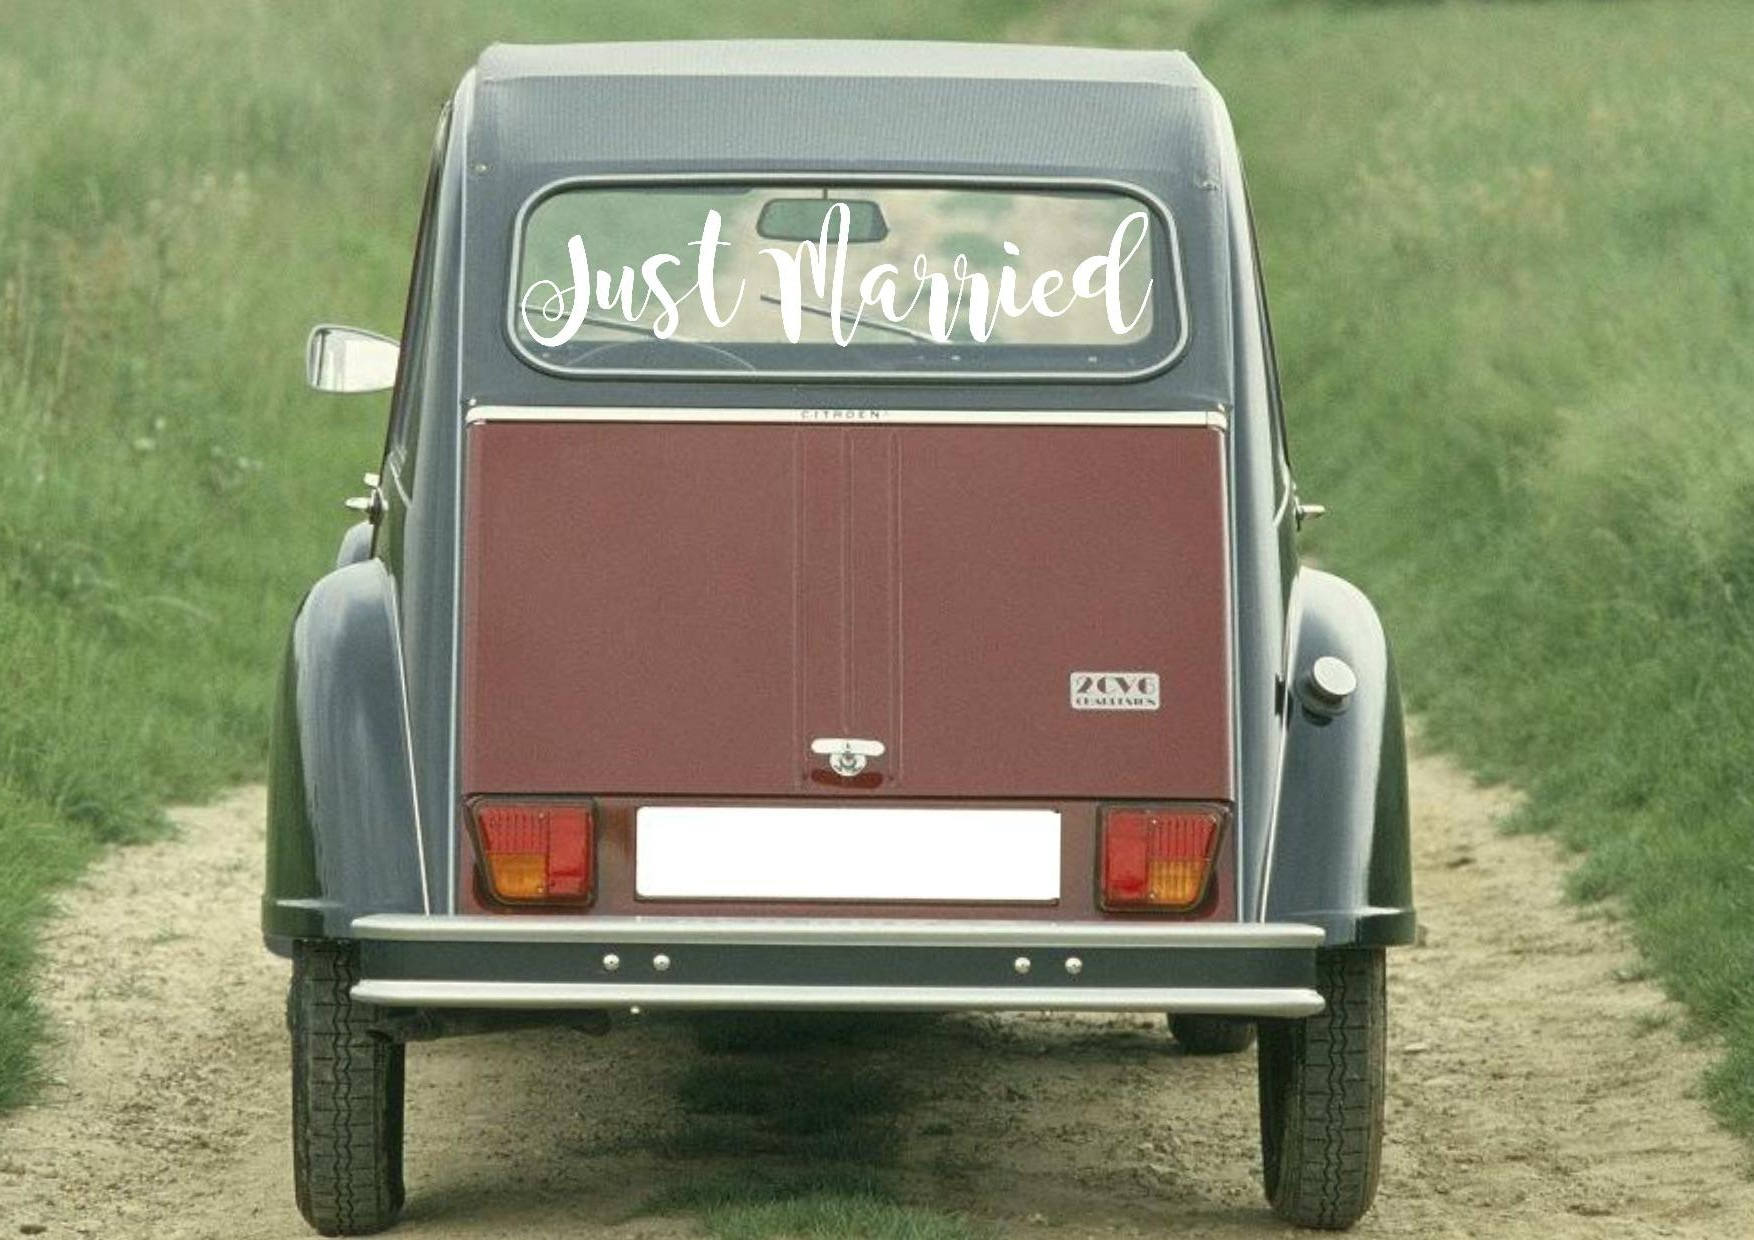 stickers just married personnalisés